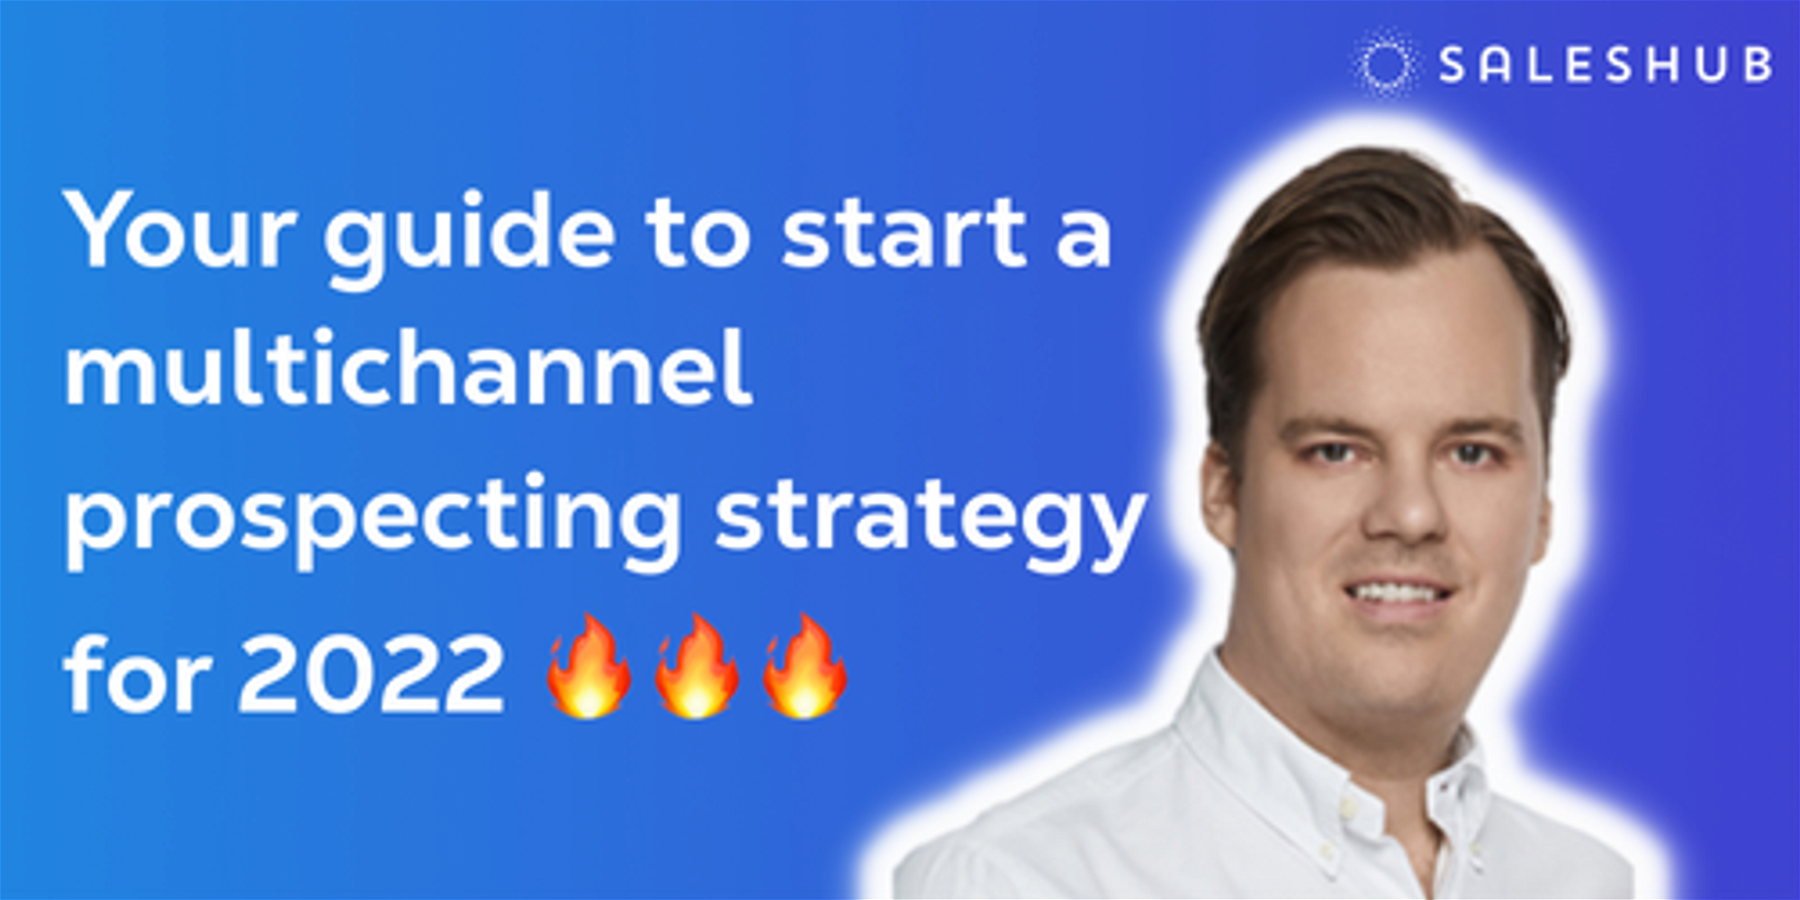 Your guide to start a multichannel prospecting strategy for 2022